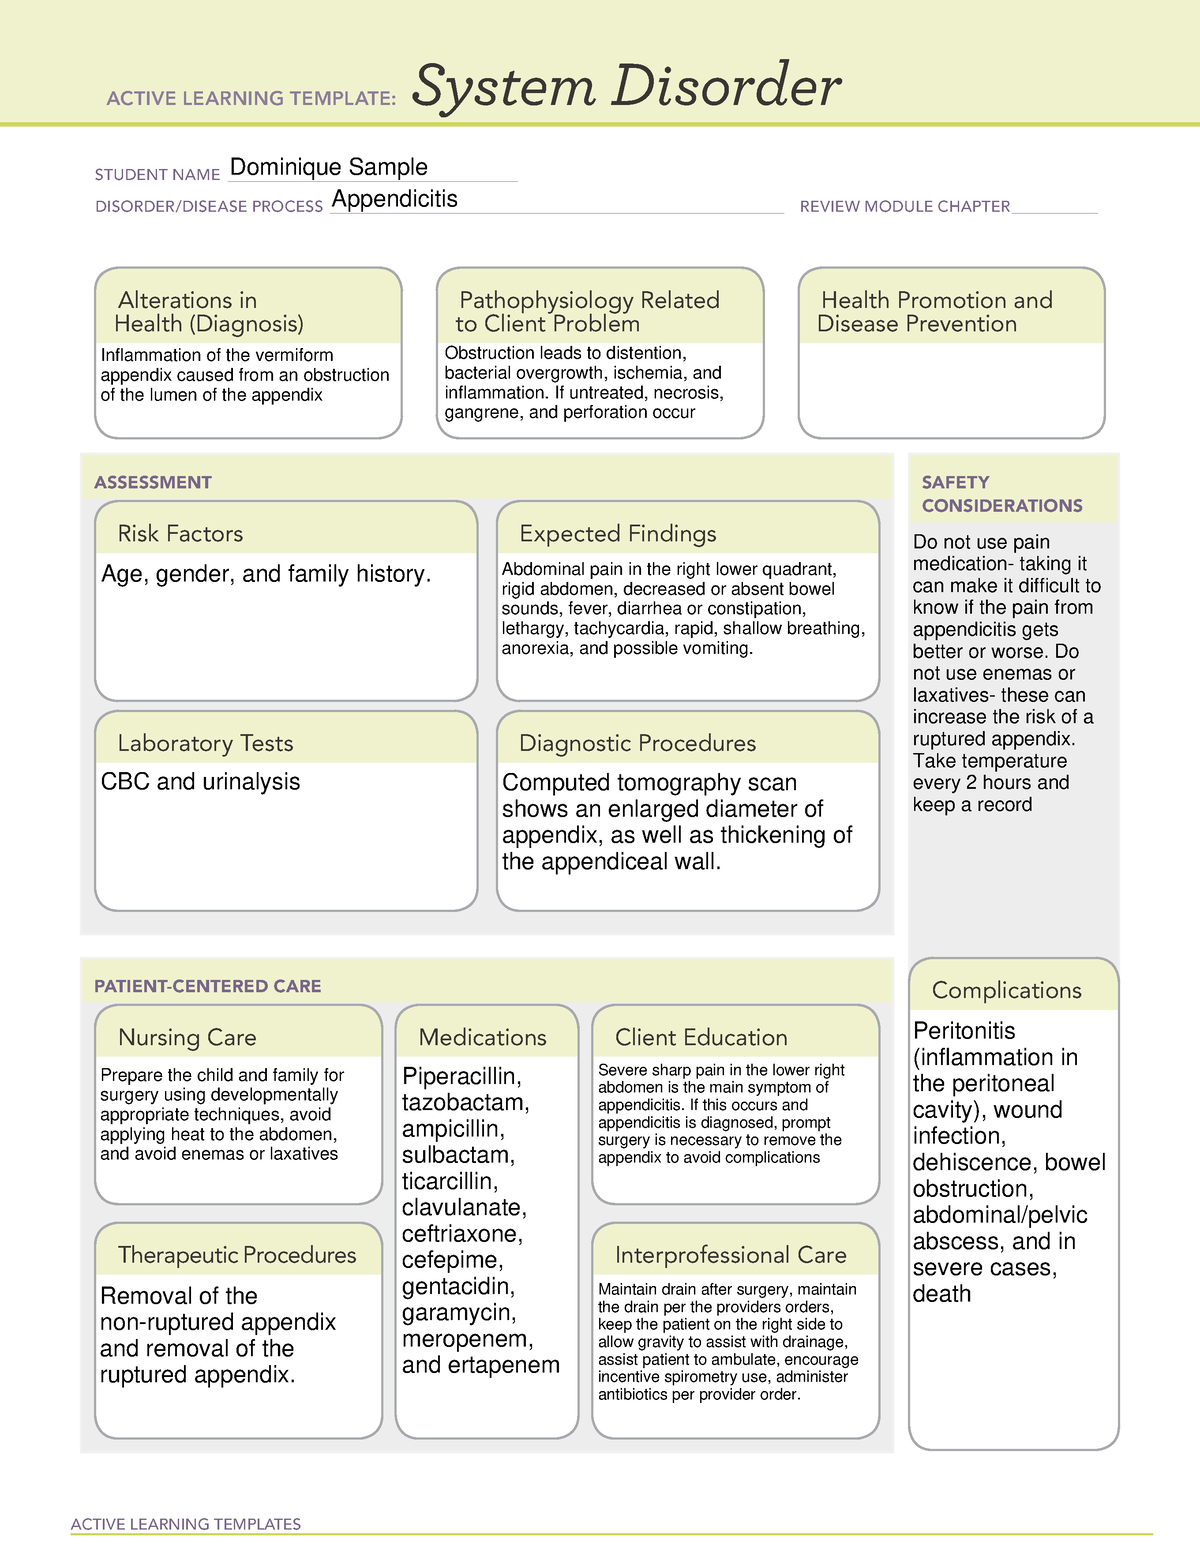 Appendicitis system disorder - ACTIVE LEARNING TEMPLATES System ...